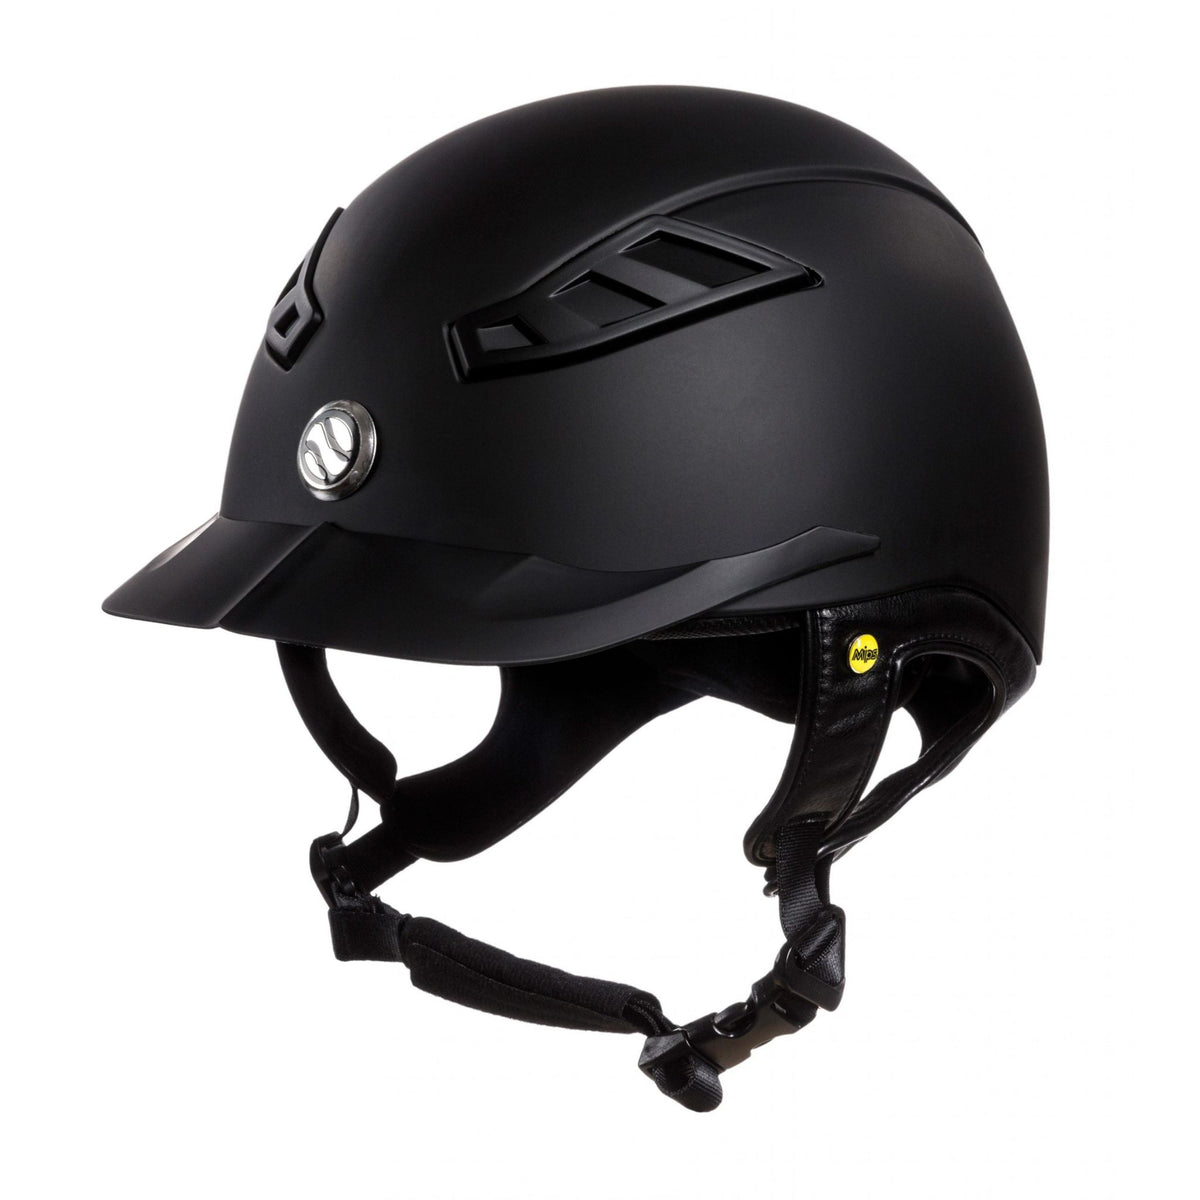 Black helmet with leather ear straps and durable plastic brim.